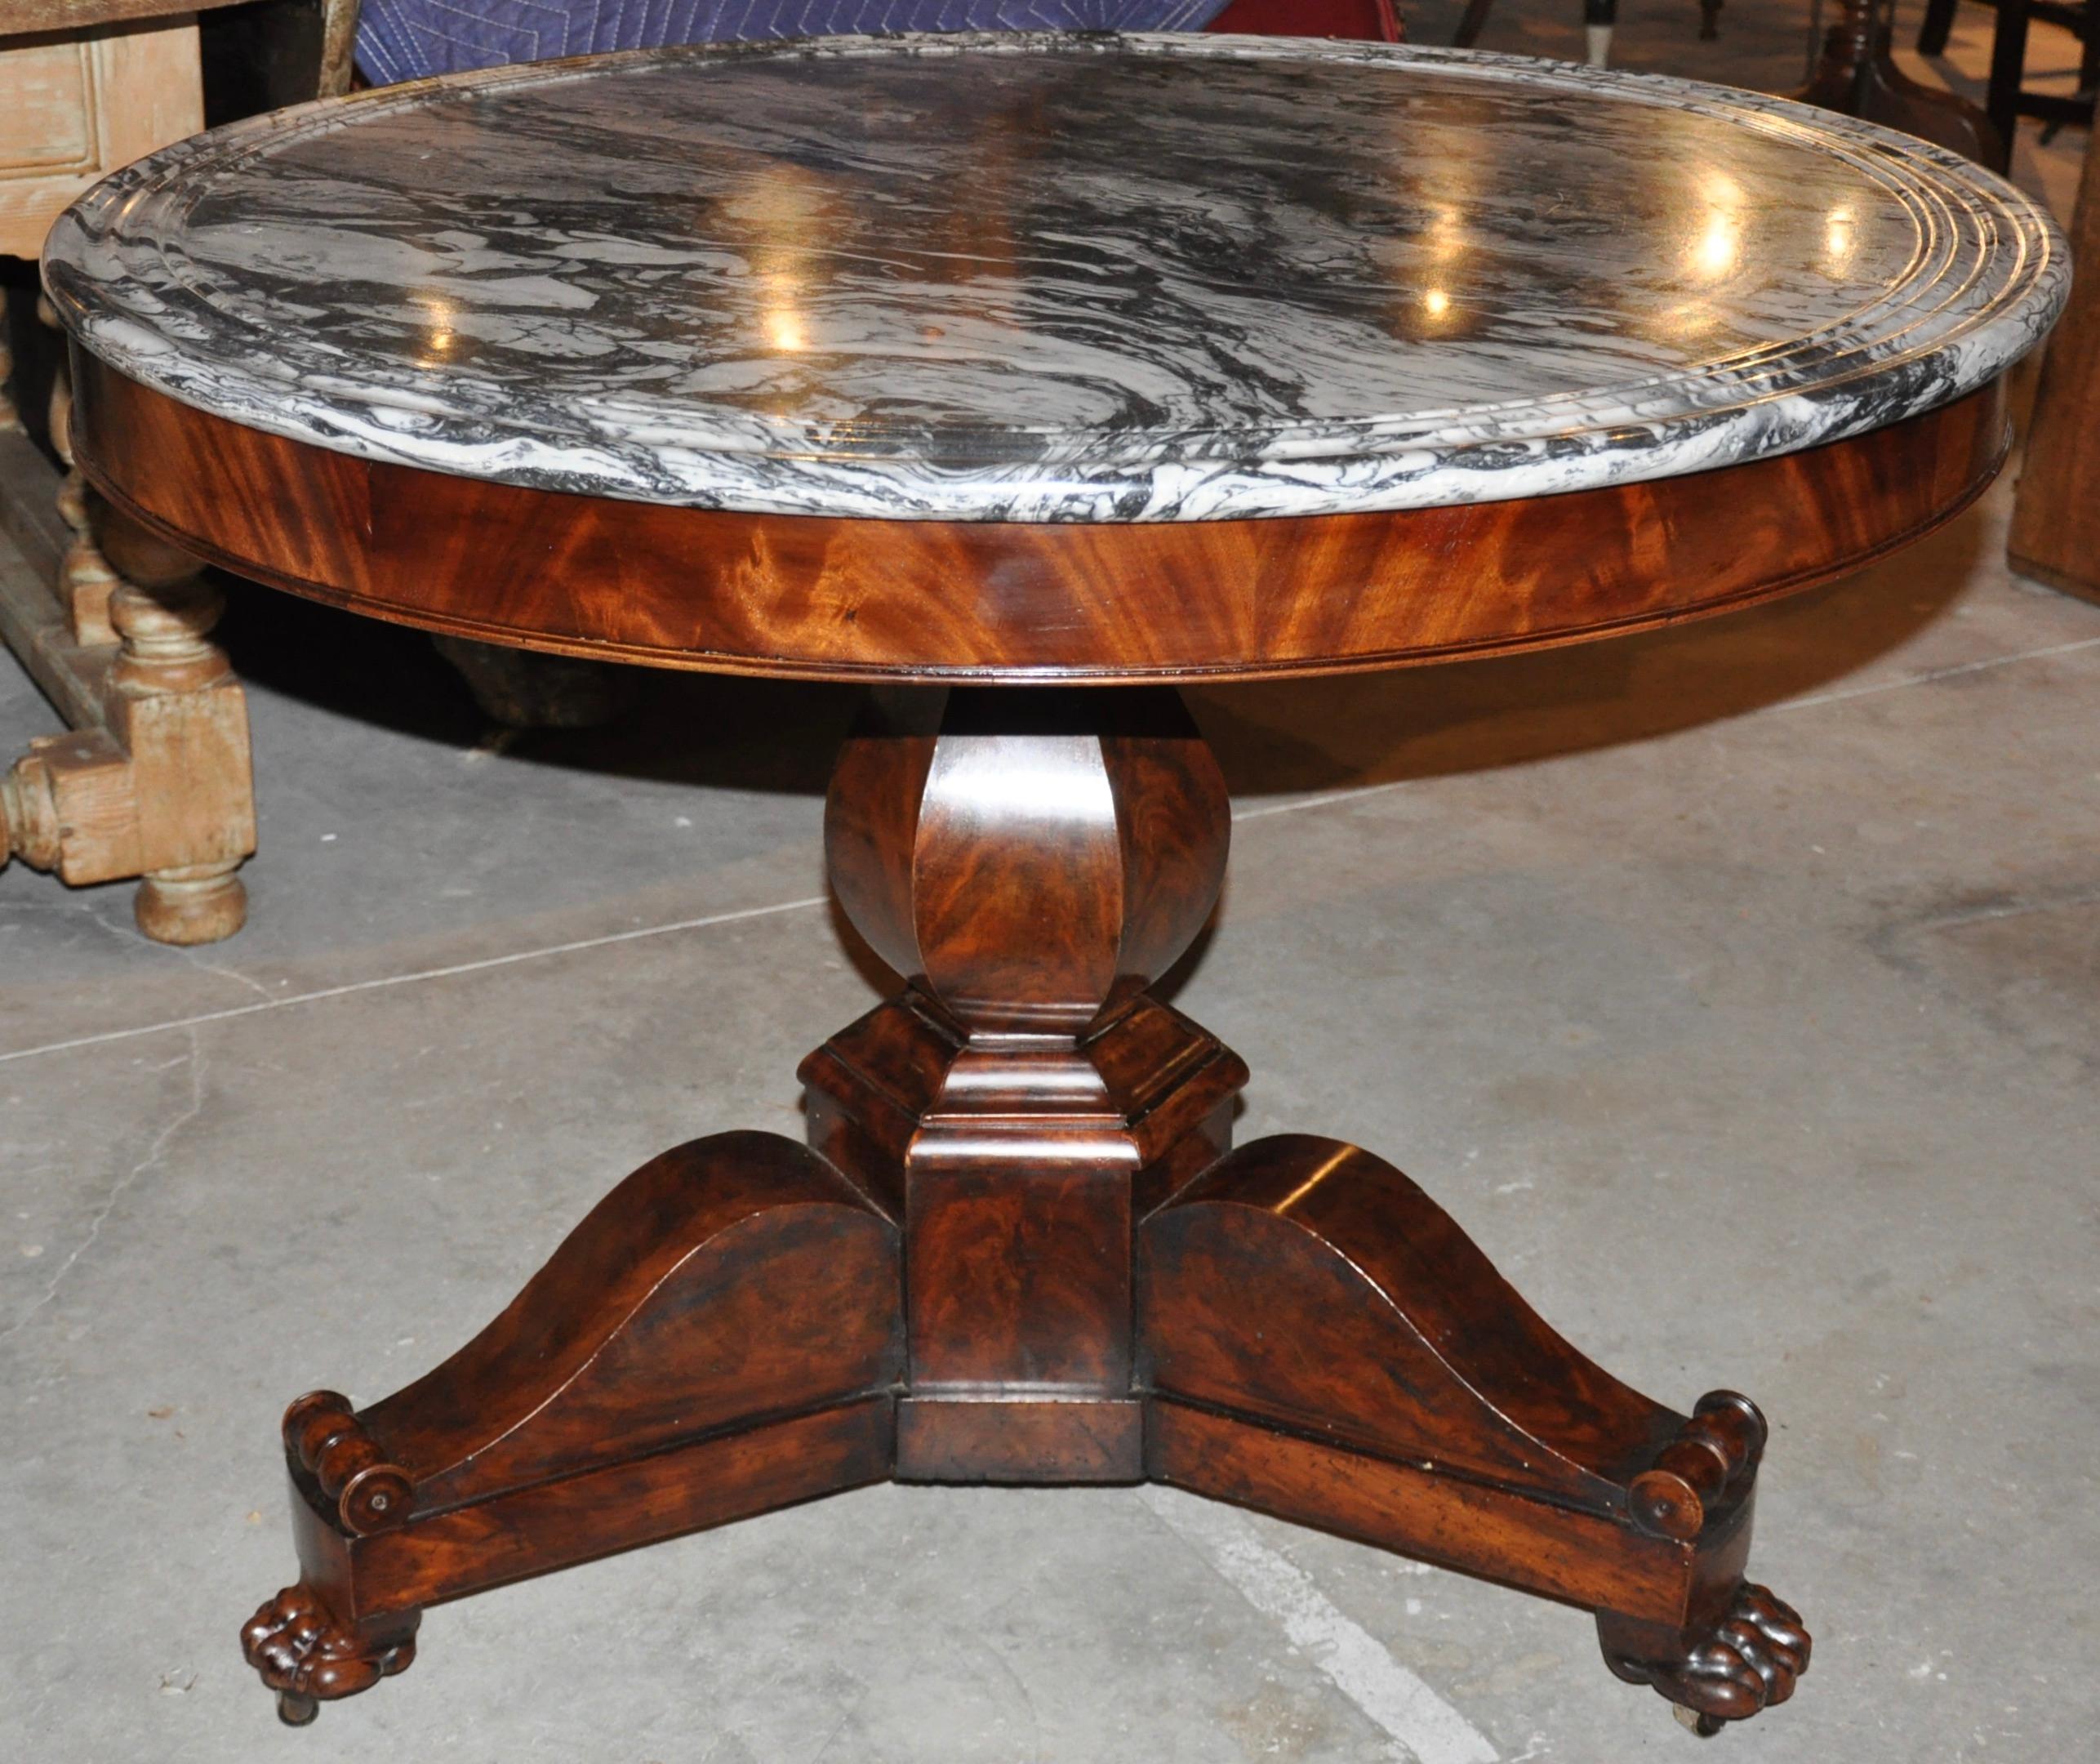 American Classical 19th Century American Empire Marble-Top Center Table